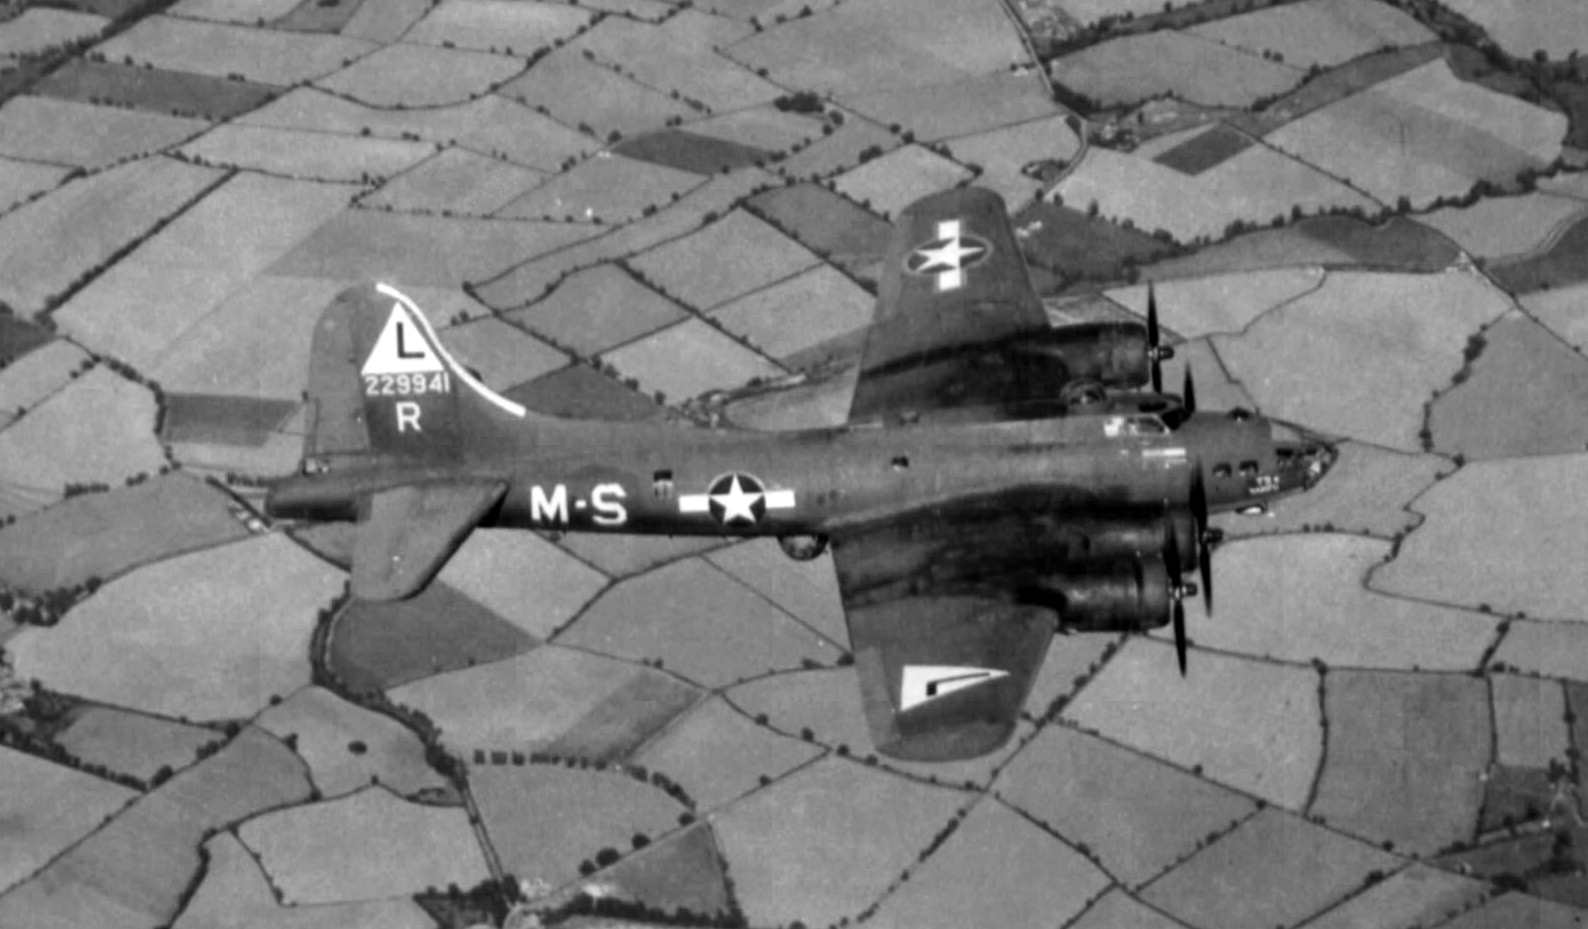 B-17 Bomber Flying Fortress – The Queen Of The Skies